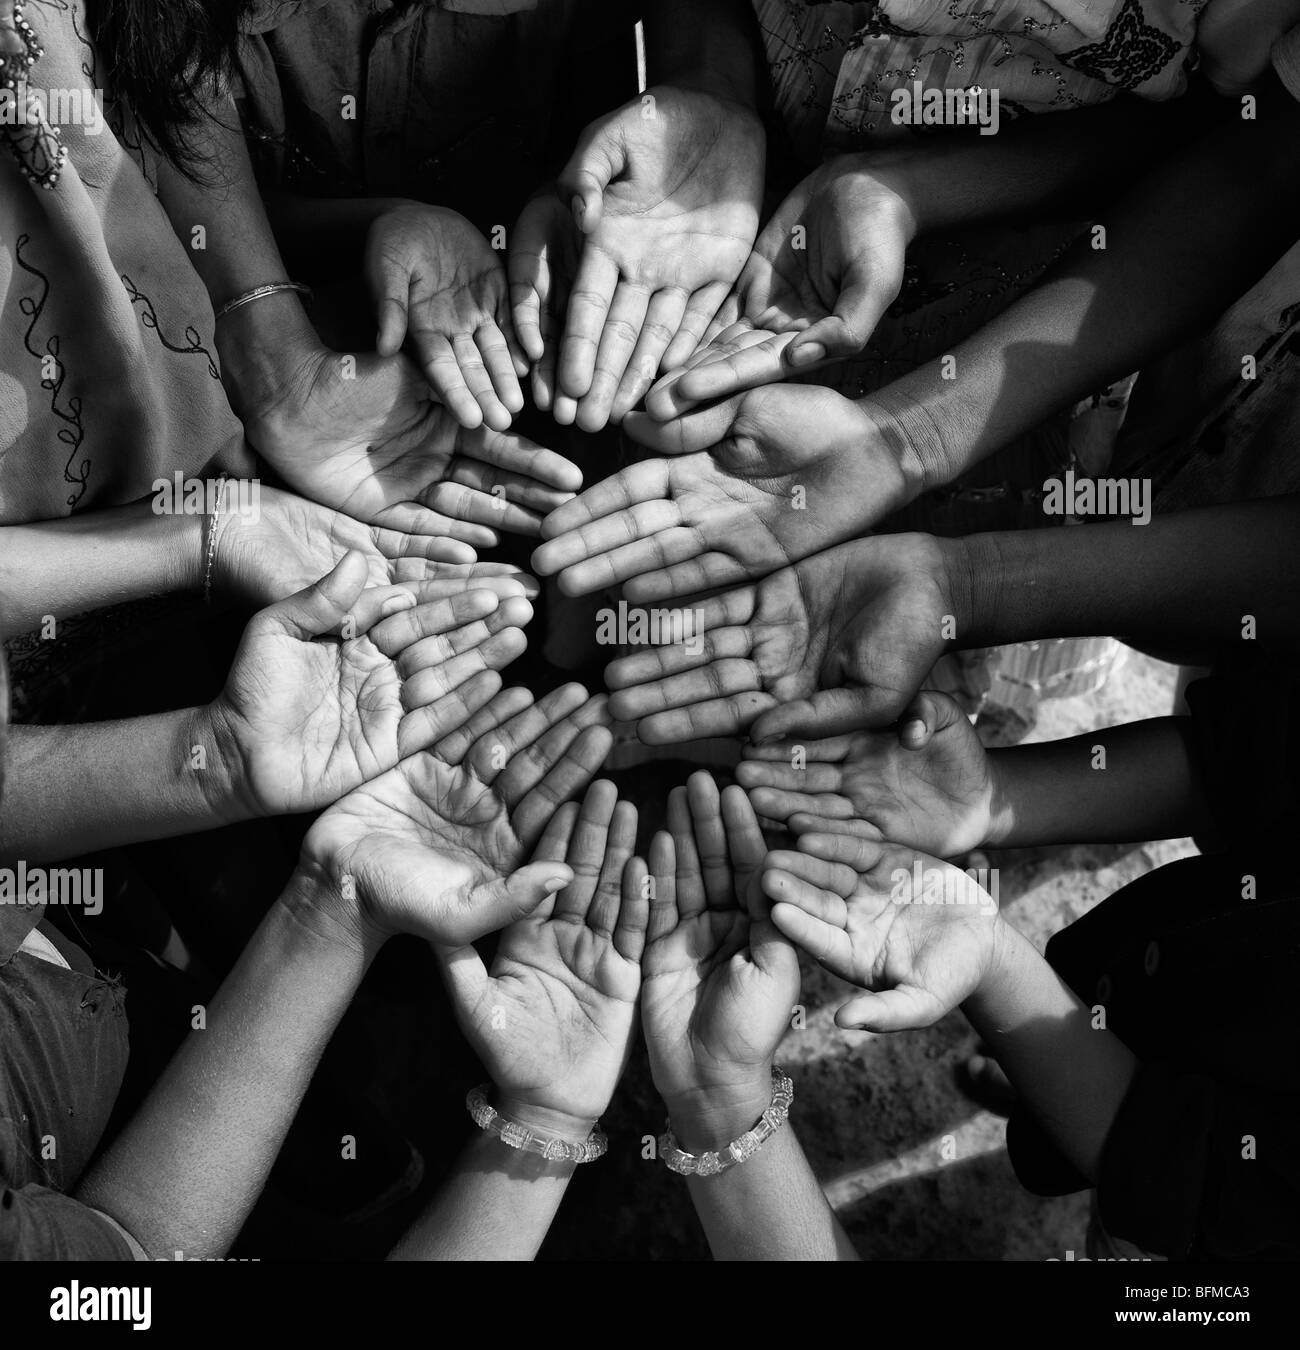 Indian childrens hands in a circle. Black and White Stock Photo